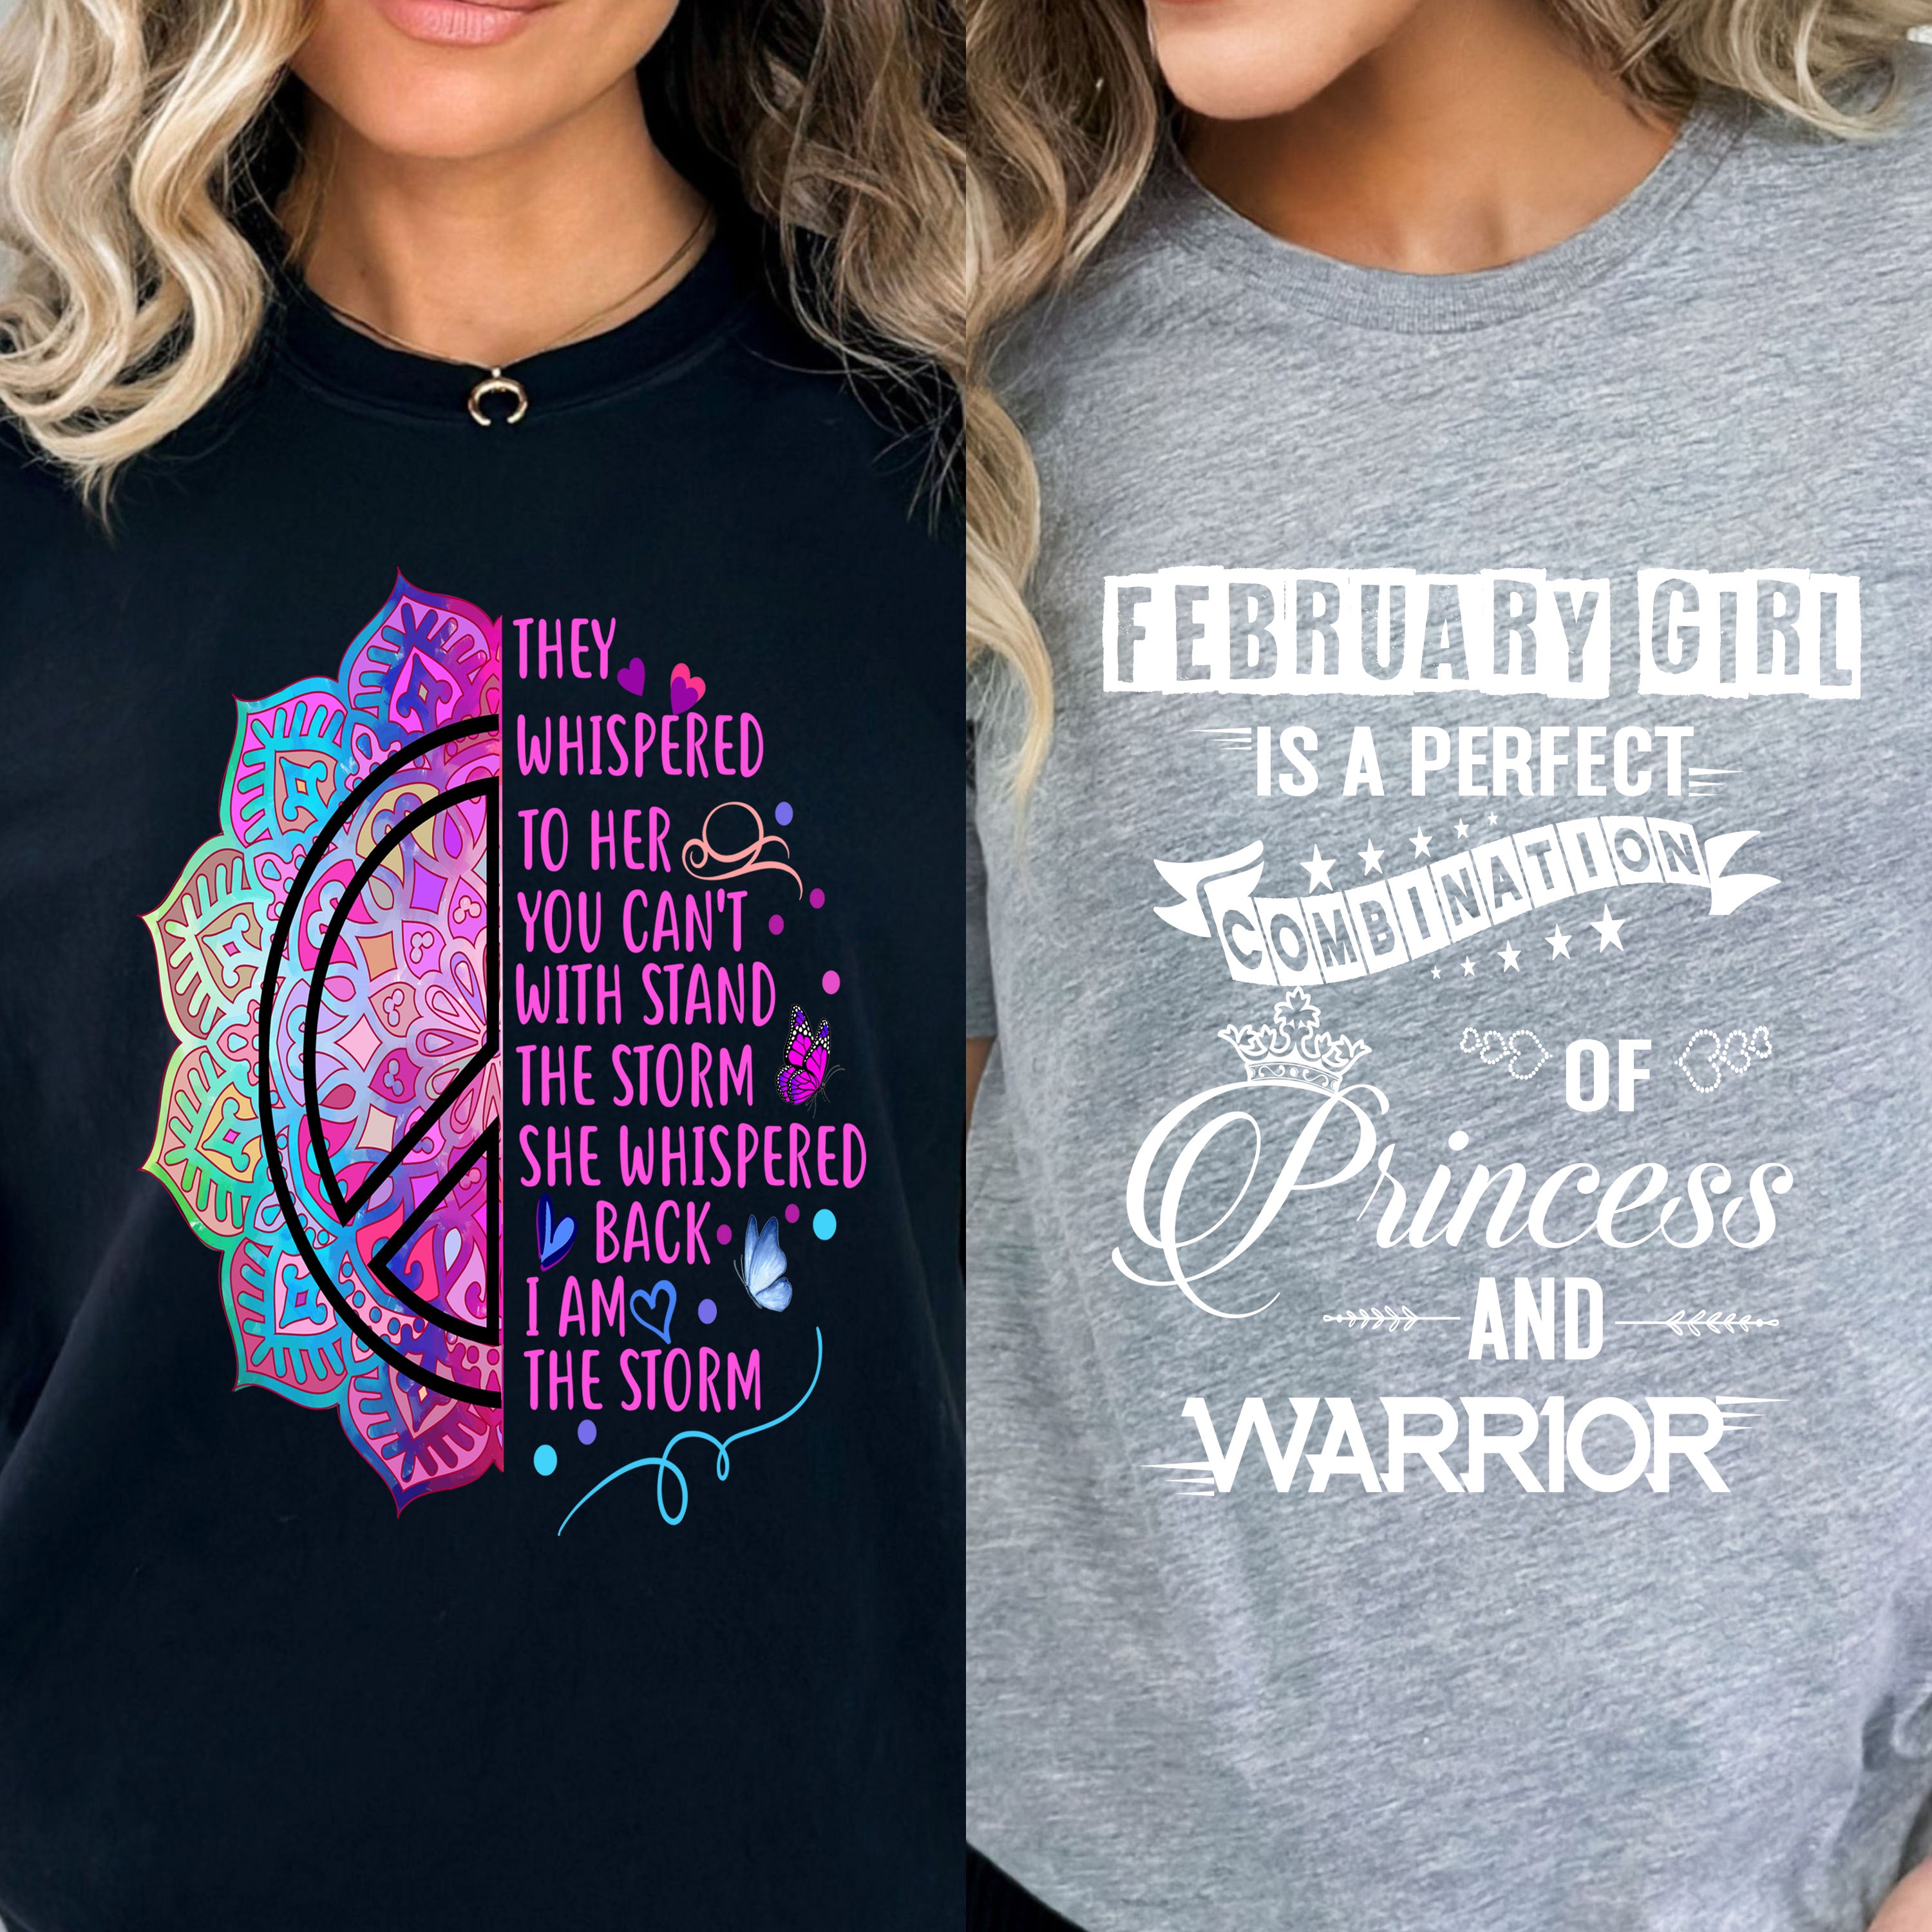 "Whispered + Princess And Warrior-February" Pack Of 2